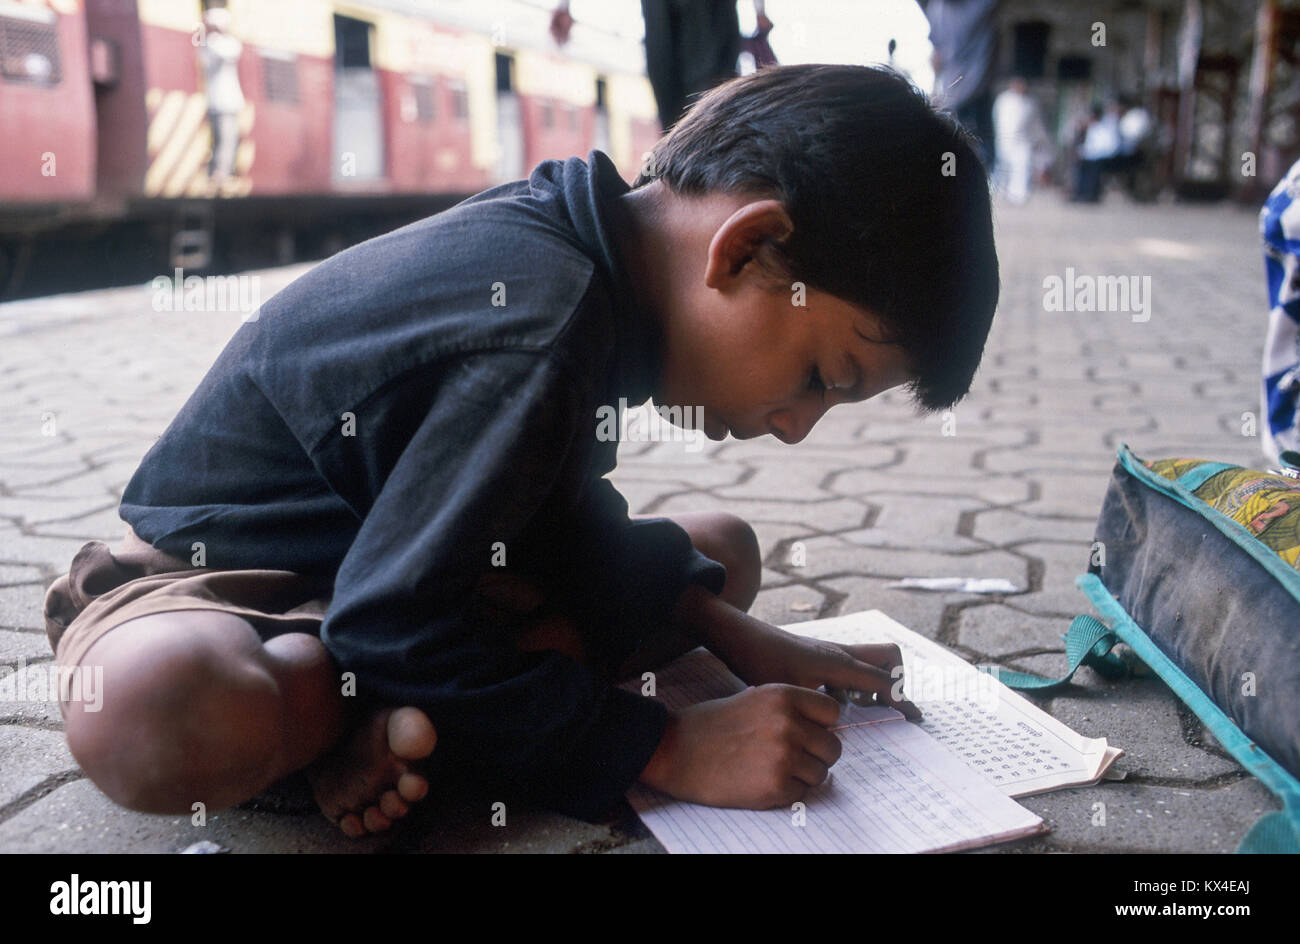 INDIA, Mumbai, former Bombay, NGO VOICE gives education classes for street and railway children on the platform at Andheri railway station, boy Raju, behind city train of western railway Stock Photo